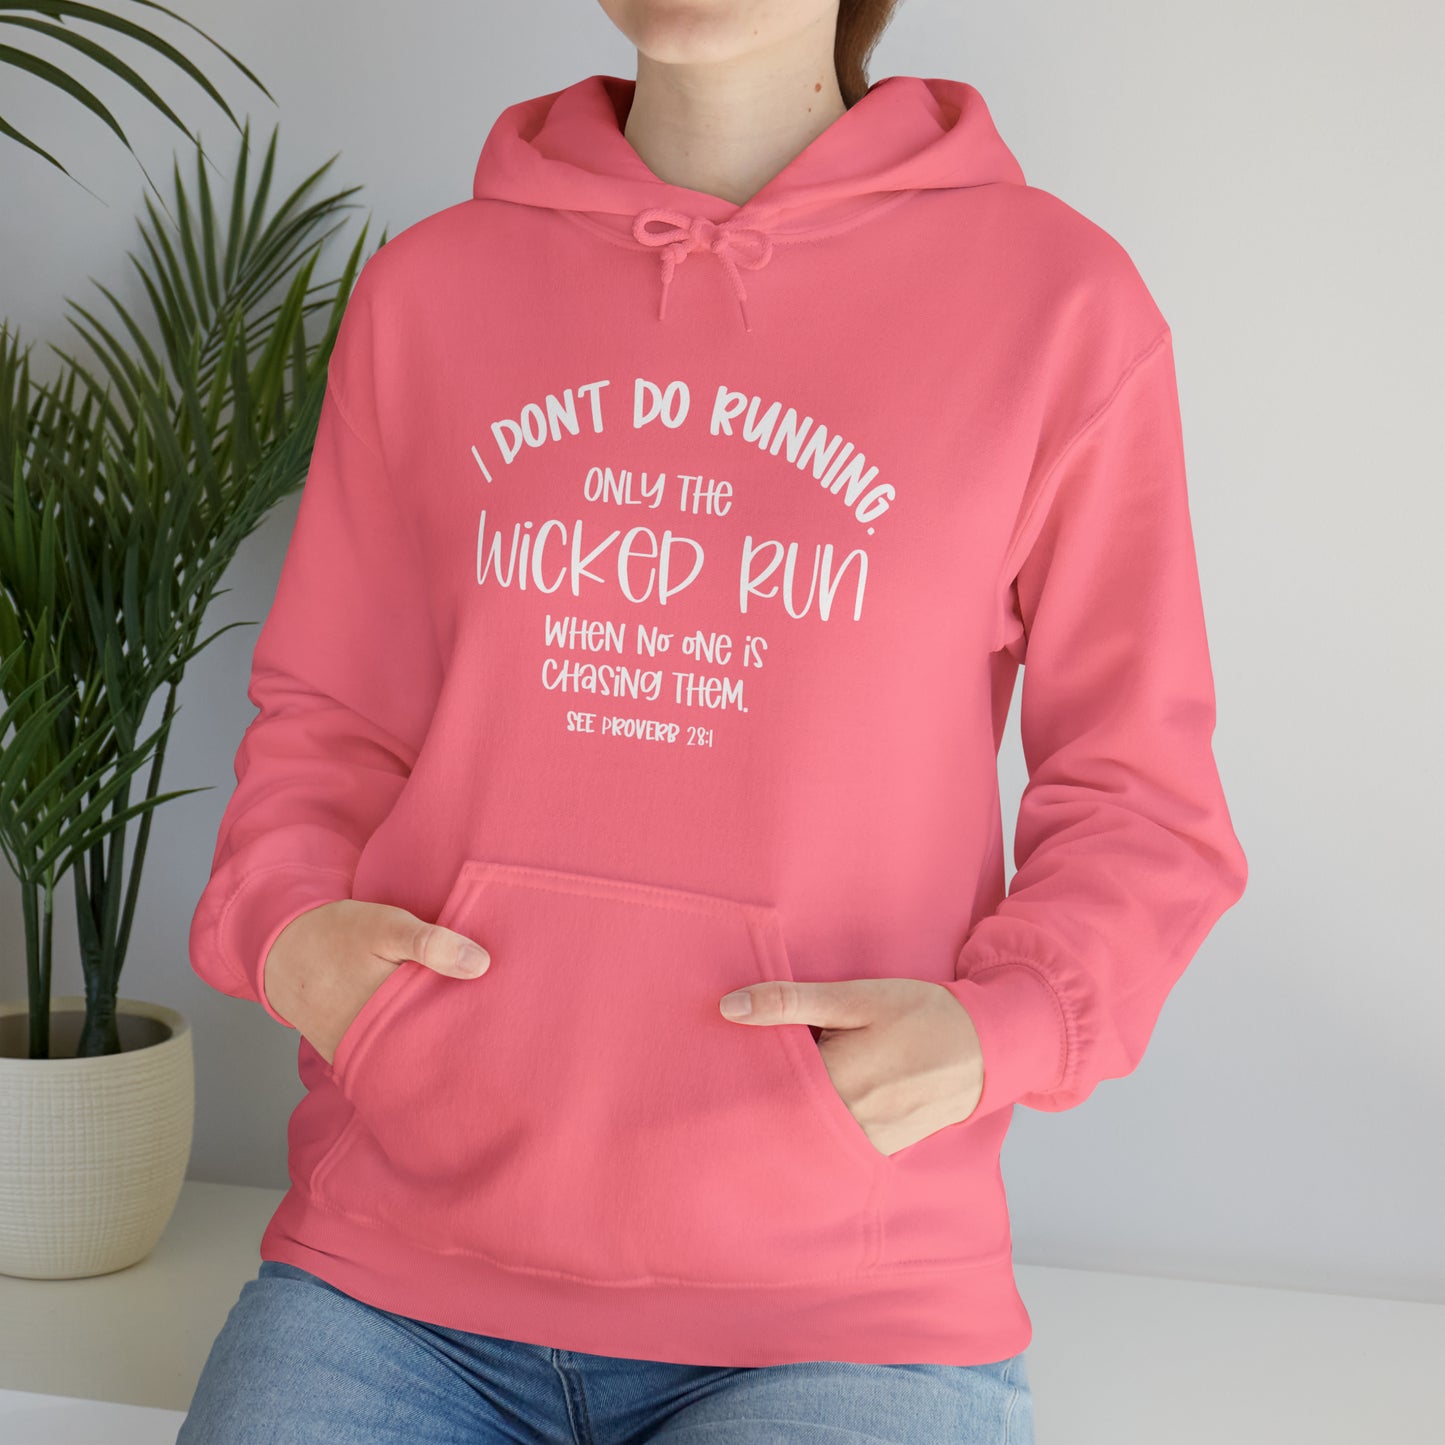 Only the wicked run when no one is chasing them | Christian Sweatshirt | Christian Apparel | Faith Inspiration